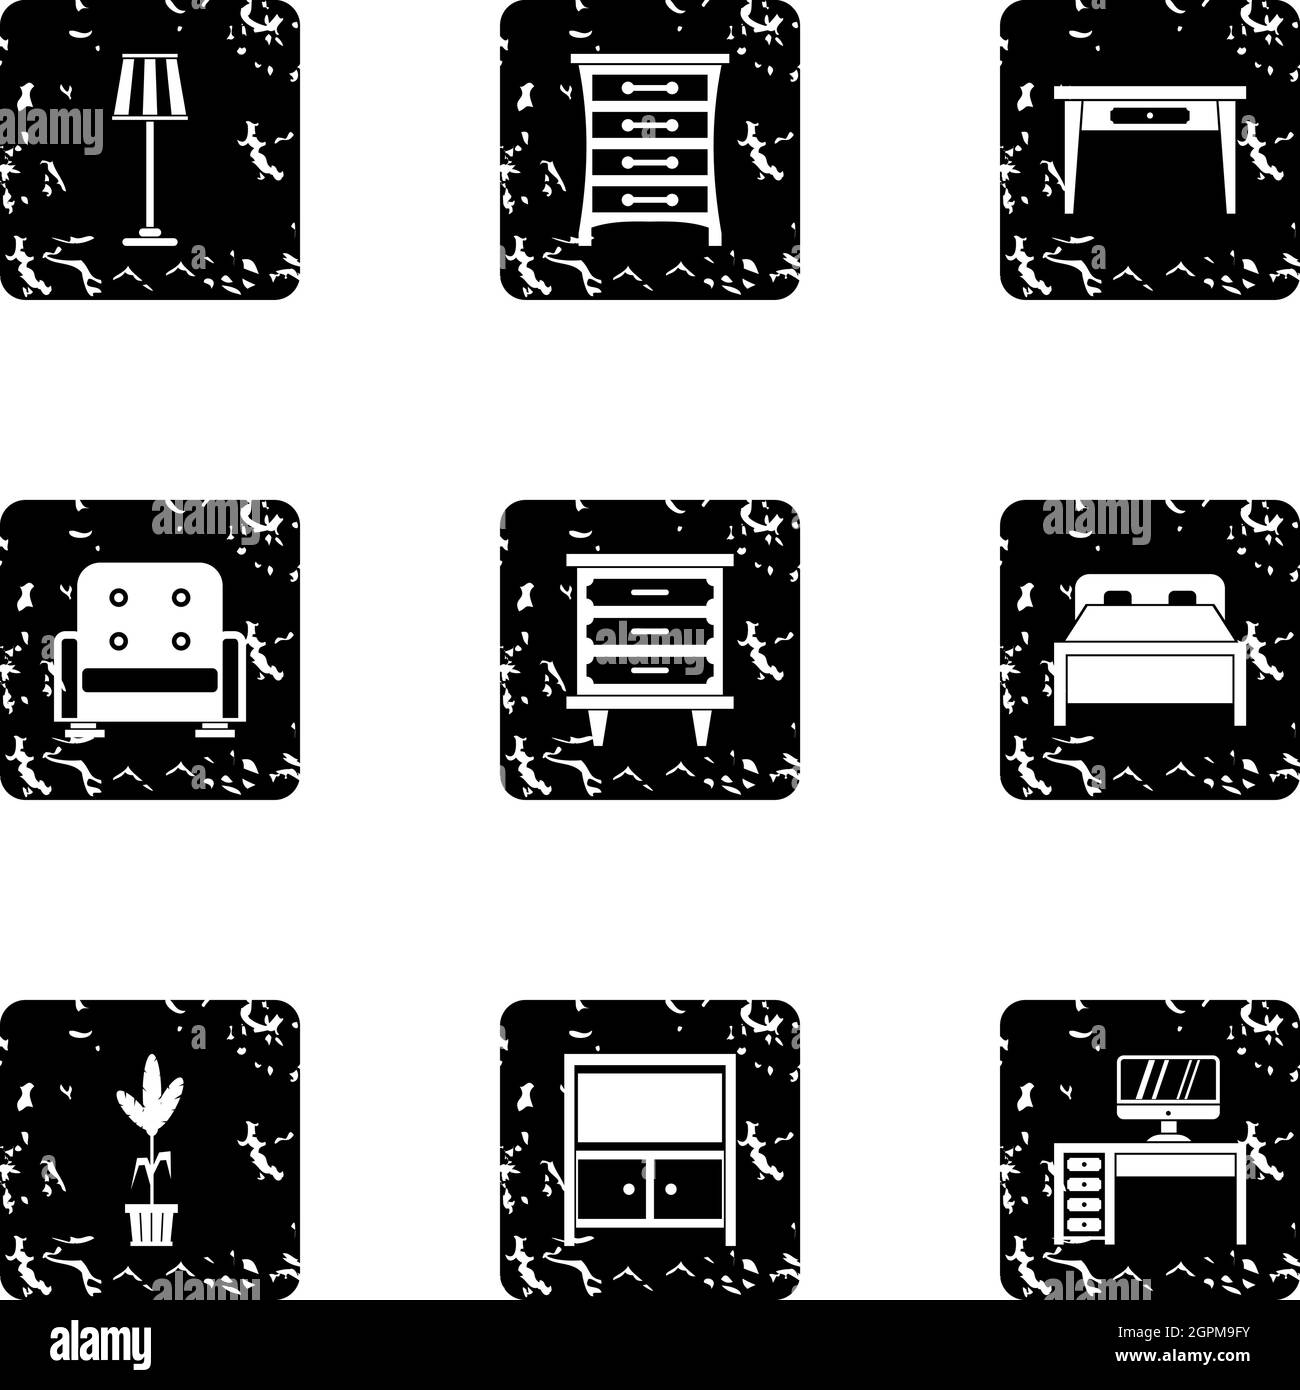 Home furnishings icons set, grunge style Stock Vector